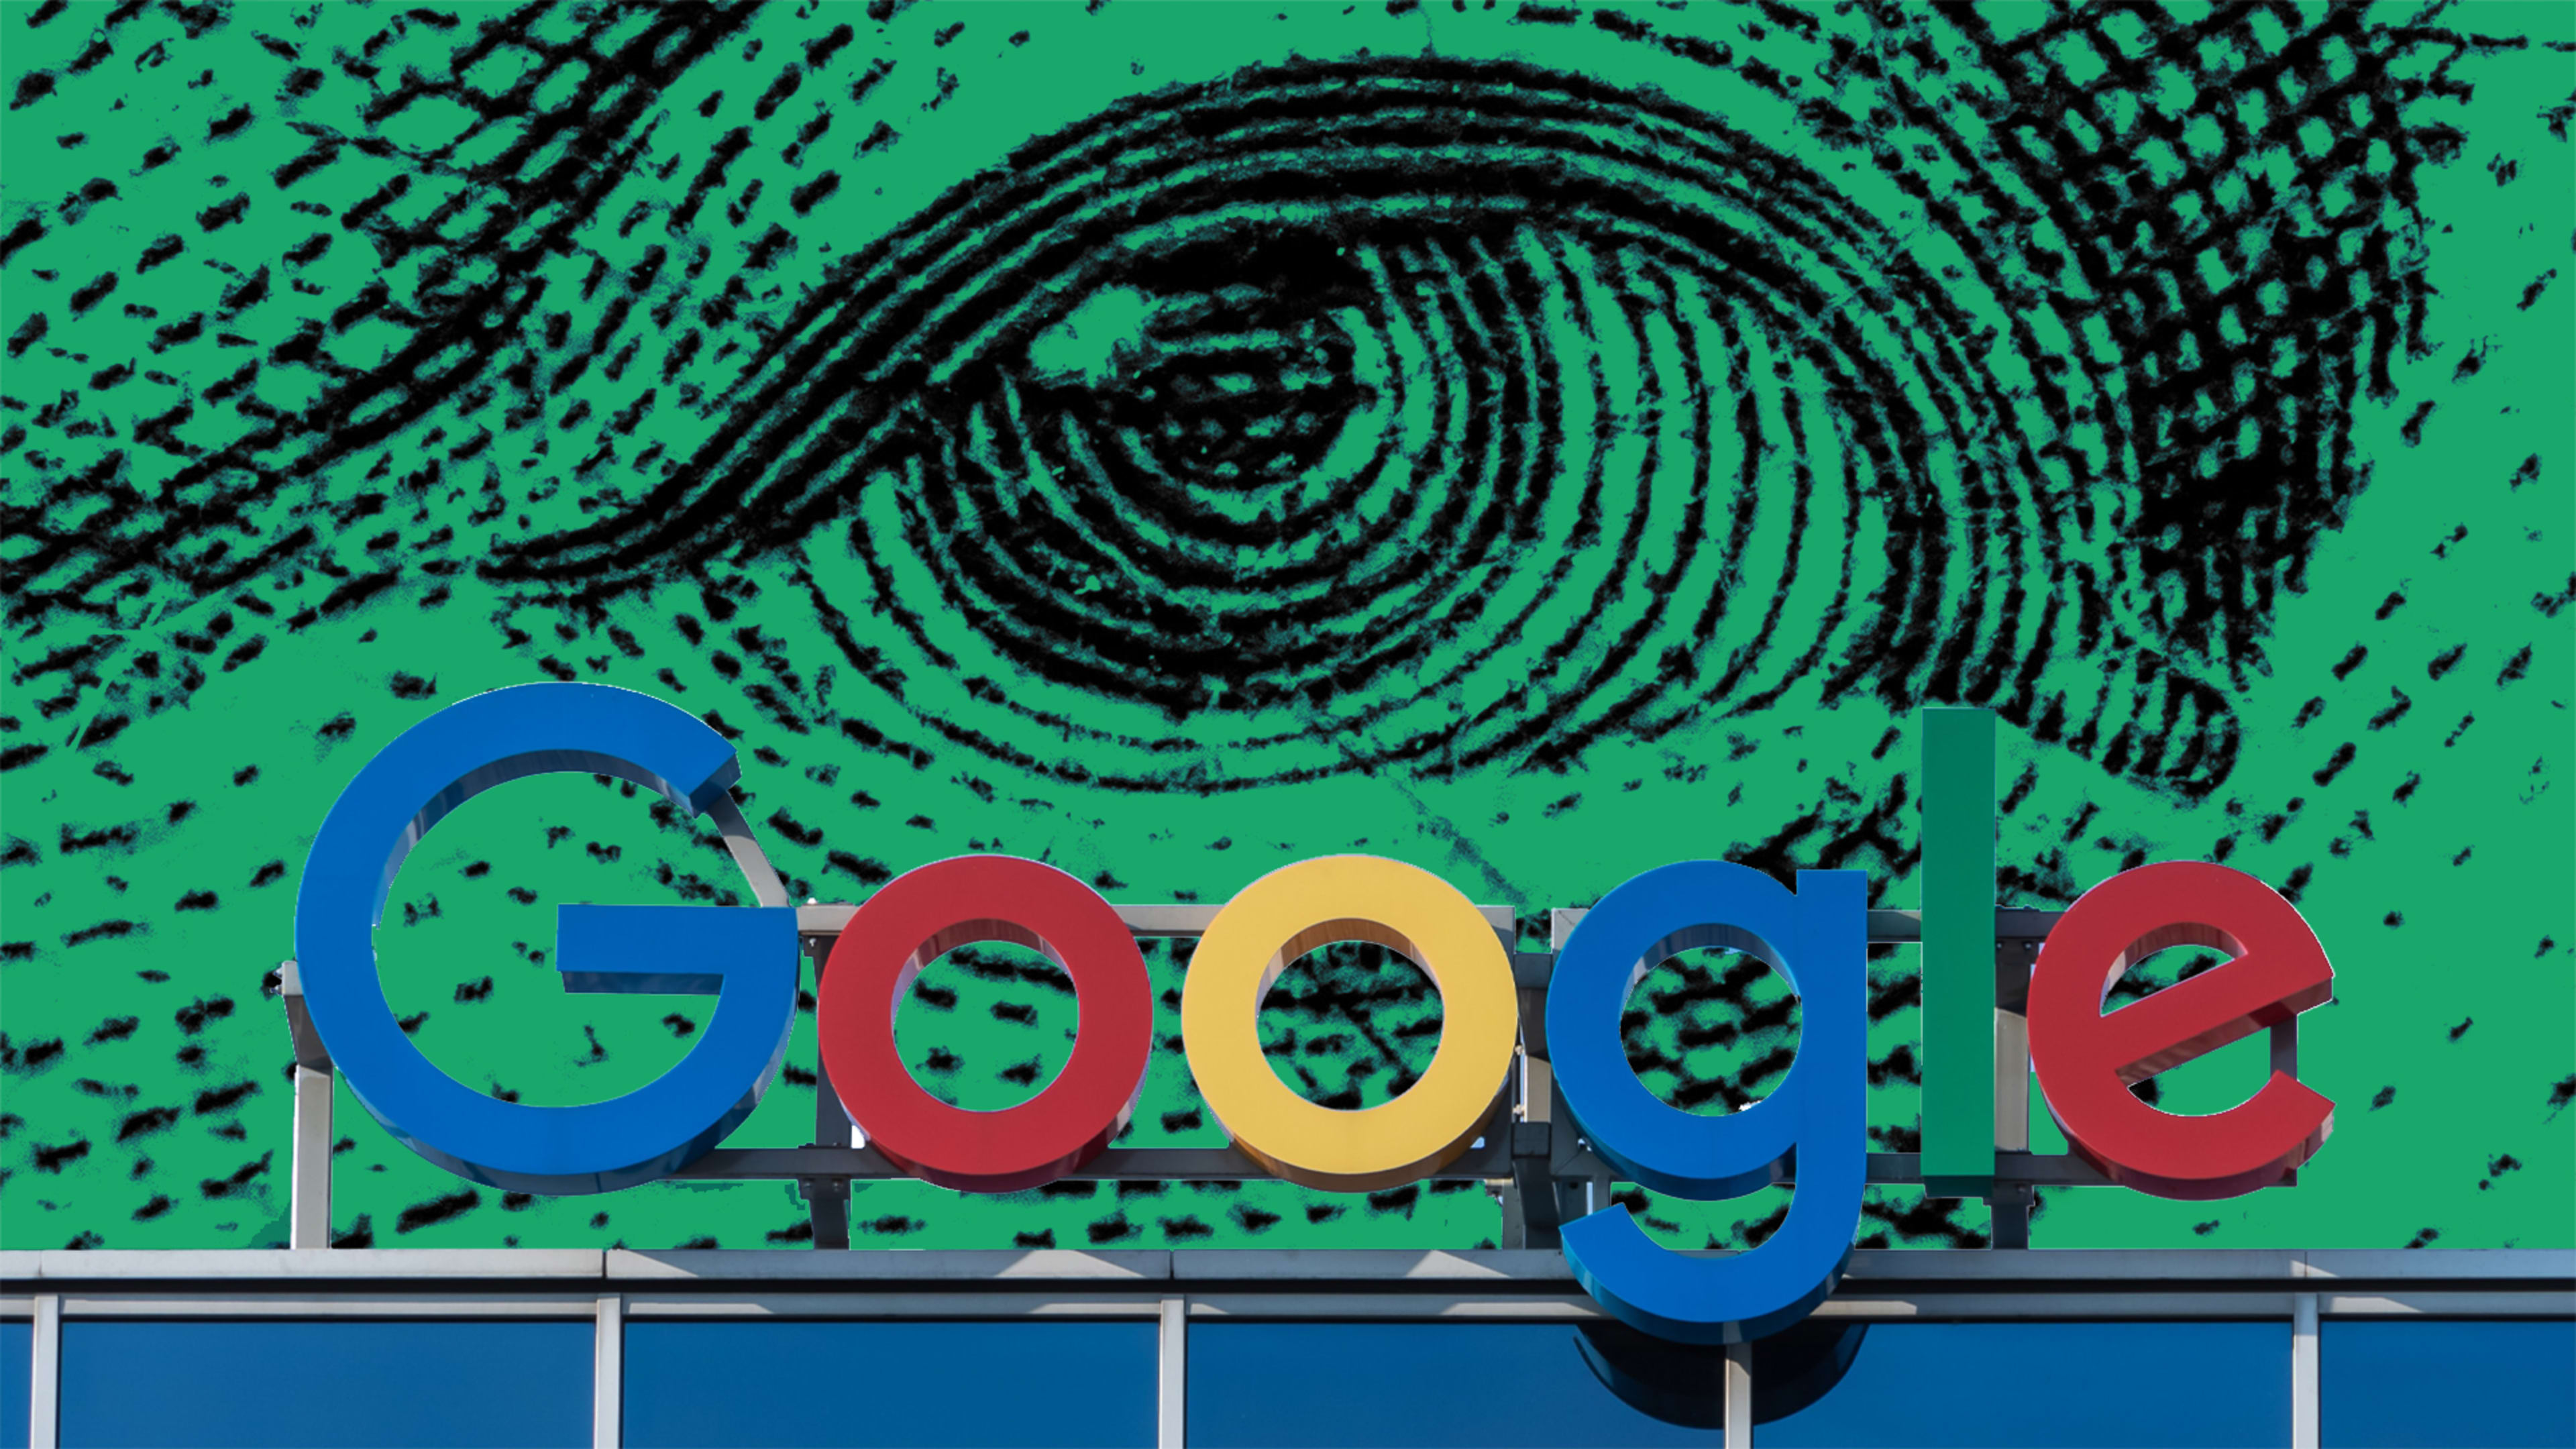 Google will pay publishers $1 billion to quell claims of unfairly profiting from their content